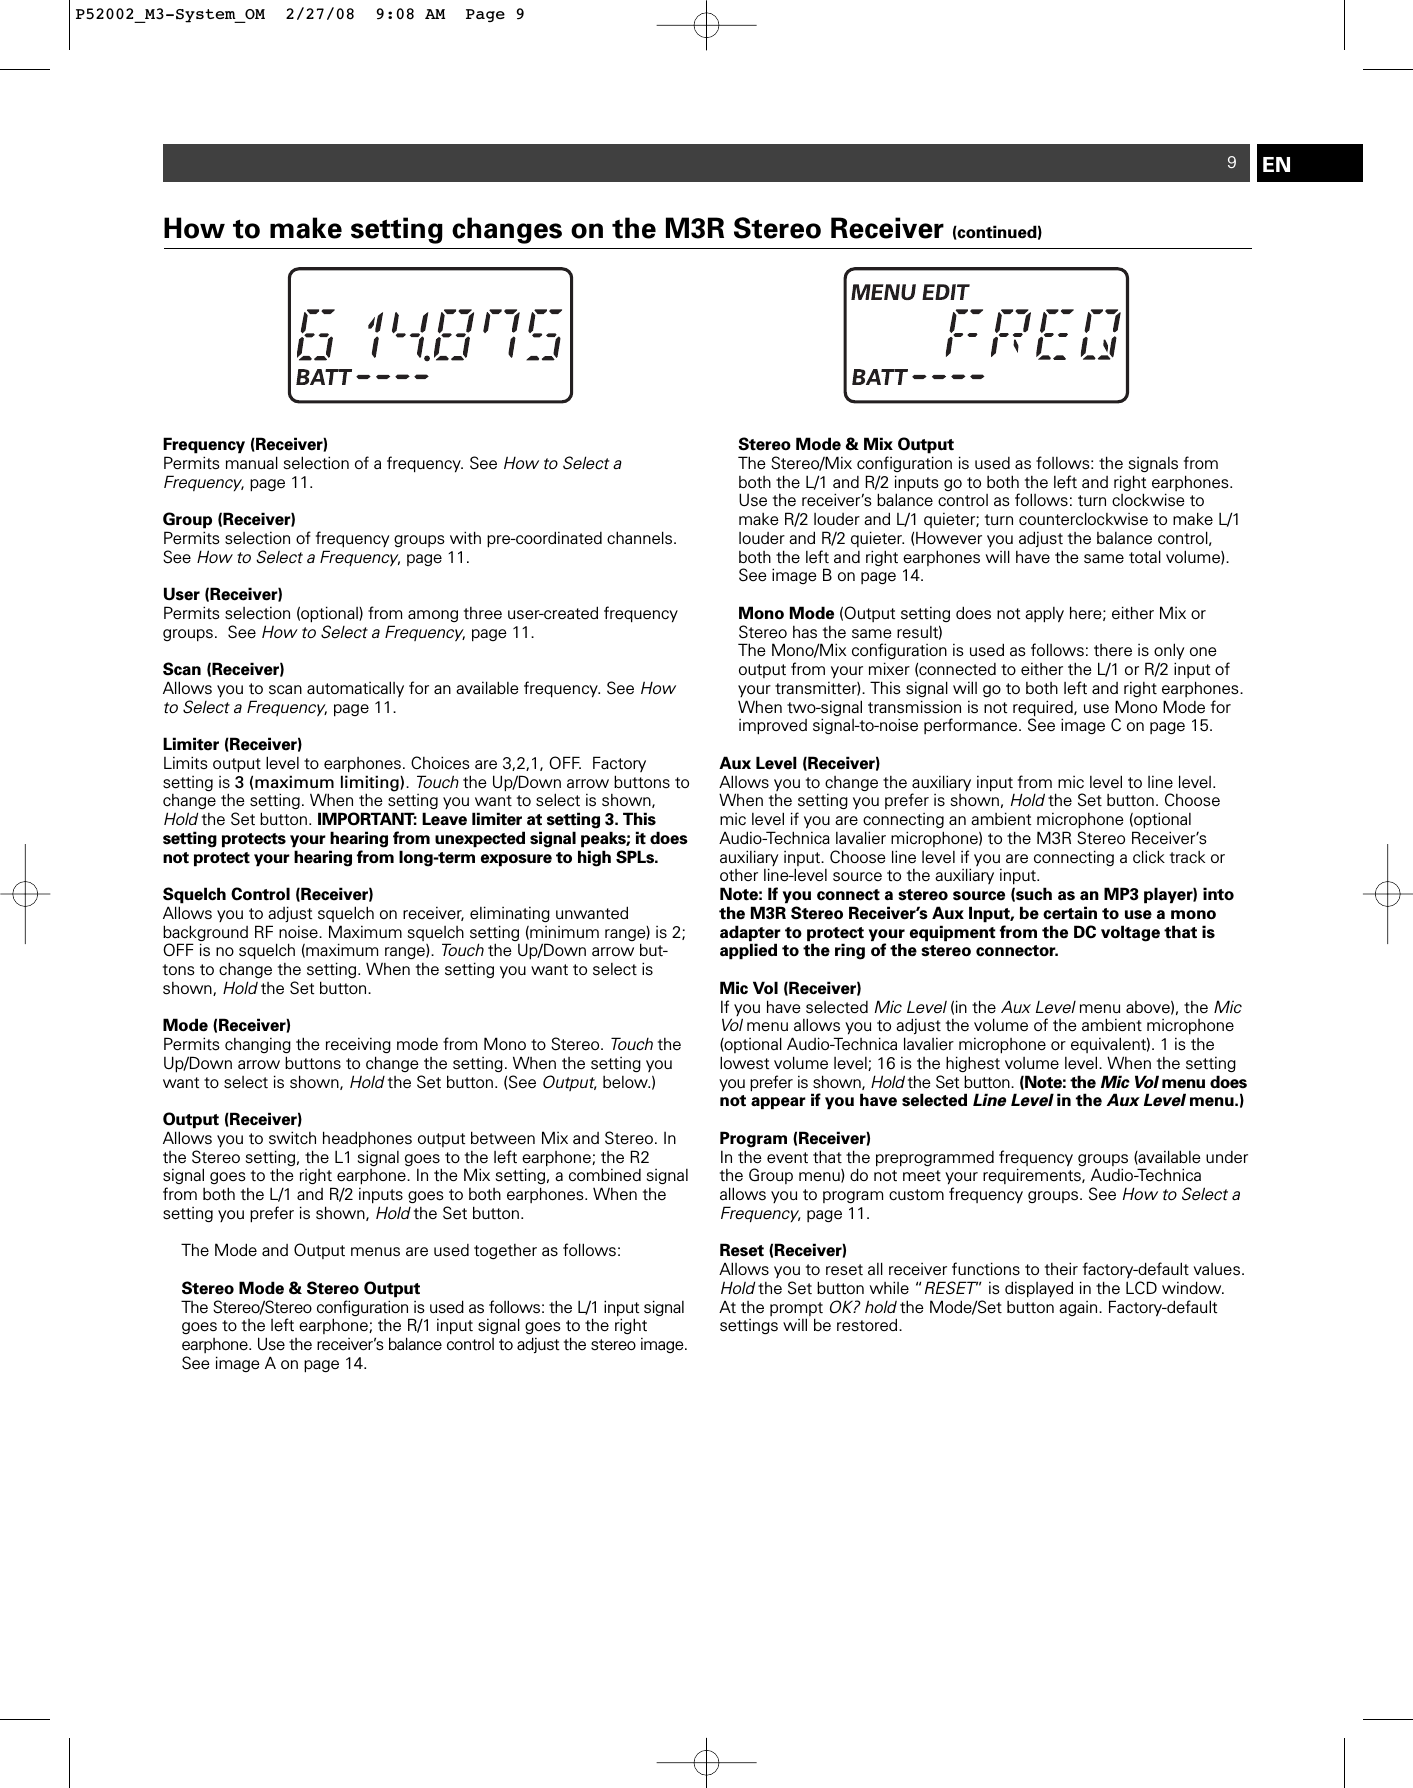 9ENFrequency (Receiver)Permits manual selection of a frequency. See How to Select a Frequency, page 11. Group (Receiver)Permits selection of frequency groups with pre-coordinated channels.See How to Select a Frequency, page 11. User (Receiver)Permits selection (optional) from among three user-created frequencygroups.  See How to Select a Frequency, page 11. Scan (Receiver)Allows you to scan automatically for an available frequency. See Howto Select a Frequency, page 11. Limiter (Receiver)Limits output level to earphones. Choices are 3,2,1, OFF.  Factory setting is 3 (maximum limiting). Touchthe Up/Down arrow buttons tochange the setting. When the setting you want to select is shown,Holdthe Set button. IMPORTANT: Leave limiter at setting 3. This setting protects your hearing from unexpected signal peaks; it doesnot protect your hearing from long-term exposure to high SPLs.Squelch Control (Receiver)Allows you to adjust squelch on receiver, eliminating unwanted background RF noise. Maximum squelch setting (minimum range) is 2;OFF is no squelch (maximum range). Touchthe Up/Down arrow but-tons to change the setting. When the setting you want to select isshown, Holdthe Set button.   Mode (Receiver)Permits changing the receiving mode from Mono to Stereo. TouchtheUp/Down arrow buttons to change the setting. When the setting youwant to select is shown, Holdthe Set button. (See Output, below.)Output (Receiver)Allows you to switch headphones output between Mix and Stereo. Inthe Stereo setting, the L1 signal goes to the left earphone; the R2 signal goes to the right earphone. In the Mix setting, a combined signalfrom both the L/1 and R/2 inputs goes to both earphones. When thesetting you prefer is shown, Holdthe Set button.The Mode and Output menus are used together as follows:Stereo Mode &amp; Stereo OutputThe Stereo/Stereo configuration is used as follows: the L/1 input signalgoes to the left earphone; the R/1 input signal goes to the right earphone. Use the receiver’s balance control to adjust the stereo image.See image A on page 14.Stereo Mode &amp; Mix OutputThe Stereo/Mix configuration is used as follows: the signals from both the L/1 and R/2 inputs go to both the left and right earphones.  Use the receiver’s balance control as follows: turn clockwise to make R/2 louder and L/1 quieter; turn counterclockwise to make L/1 louder and R/2 quieter. (However you adjust the balance control, both the left and right earphones will have the same total volume).See image B on page 14.Mono Mode (Output setting does not apply here; either Mix or Stereo has the same result)The Mono/Mix configuration is used as follows: there is only one output from your mixer (connected to either the L/1 or R/2 input of your transmitter). This signal will go to both left and right earphones.  When two-signal transmission is not required, use Mono Mode for improved signal-to-noise performance. See image C on page 15.Aux Level (Receiver)Allows you to change the auxiliary input from mic level to line level.When the setting you prefer is shown, Holdthe Set button. Choosemic level if you are connecting an ambient microphone (optional Audio-Technica lavalier microphone) to the M3R Stereo Receiver’s auxiliary input. Choose line level if you are connecting a click track orother line-level source to the auxiliary input.Note: If you connect a stereo source (such as an MP3 player) intothe M3R Stereo Receiver’s Aux Input, be certain to use a monoadapter to protect your equipment from the DC voltage that is applied to the ring of the stereo connector.Mic Vol (Receiver)If you have selected Mic Level(in the Aux Levelmenu above), the MicVolmenu allows you to adjust the volume of the ambient microphone(optional Audio-Technica lavalier microphone or equivalent). 1 is thelowest volume level; 16 is the highest volume level. When the settingyou prefer is shown, Holdthe Set button. (Note: the Mic Volmenu doesnot appear if you have selected Line Levelin the Aux Levelmenu.)Program (Receiver)In the event that the preprogrammed frequency groups (available underthe Group menu) do not meet your requirements, Audio-Technica allows you to program custom frequency groups. See How to Select aFrequency, page 11. Reset (Receiver)Allows you to reset all receiver functions to their factory-default values.Hold the Set button while “RESET” is displayed in the LCD window.At the prompt OK? holdthe Mode/Set button again. Factory-default settings will be restored.  How to make setting changes on the M3R Stereo Receiver (continued)P52002_M3-System_OM  2/27/08  9:08 AM  Page 9